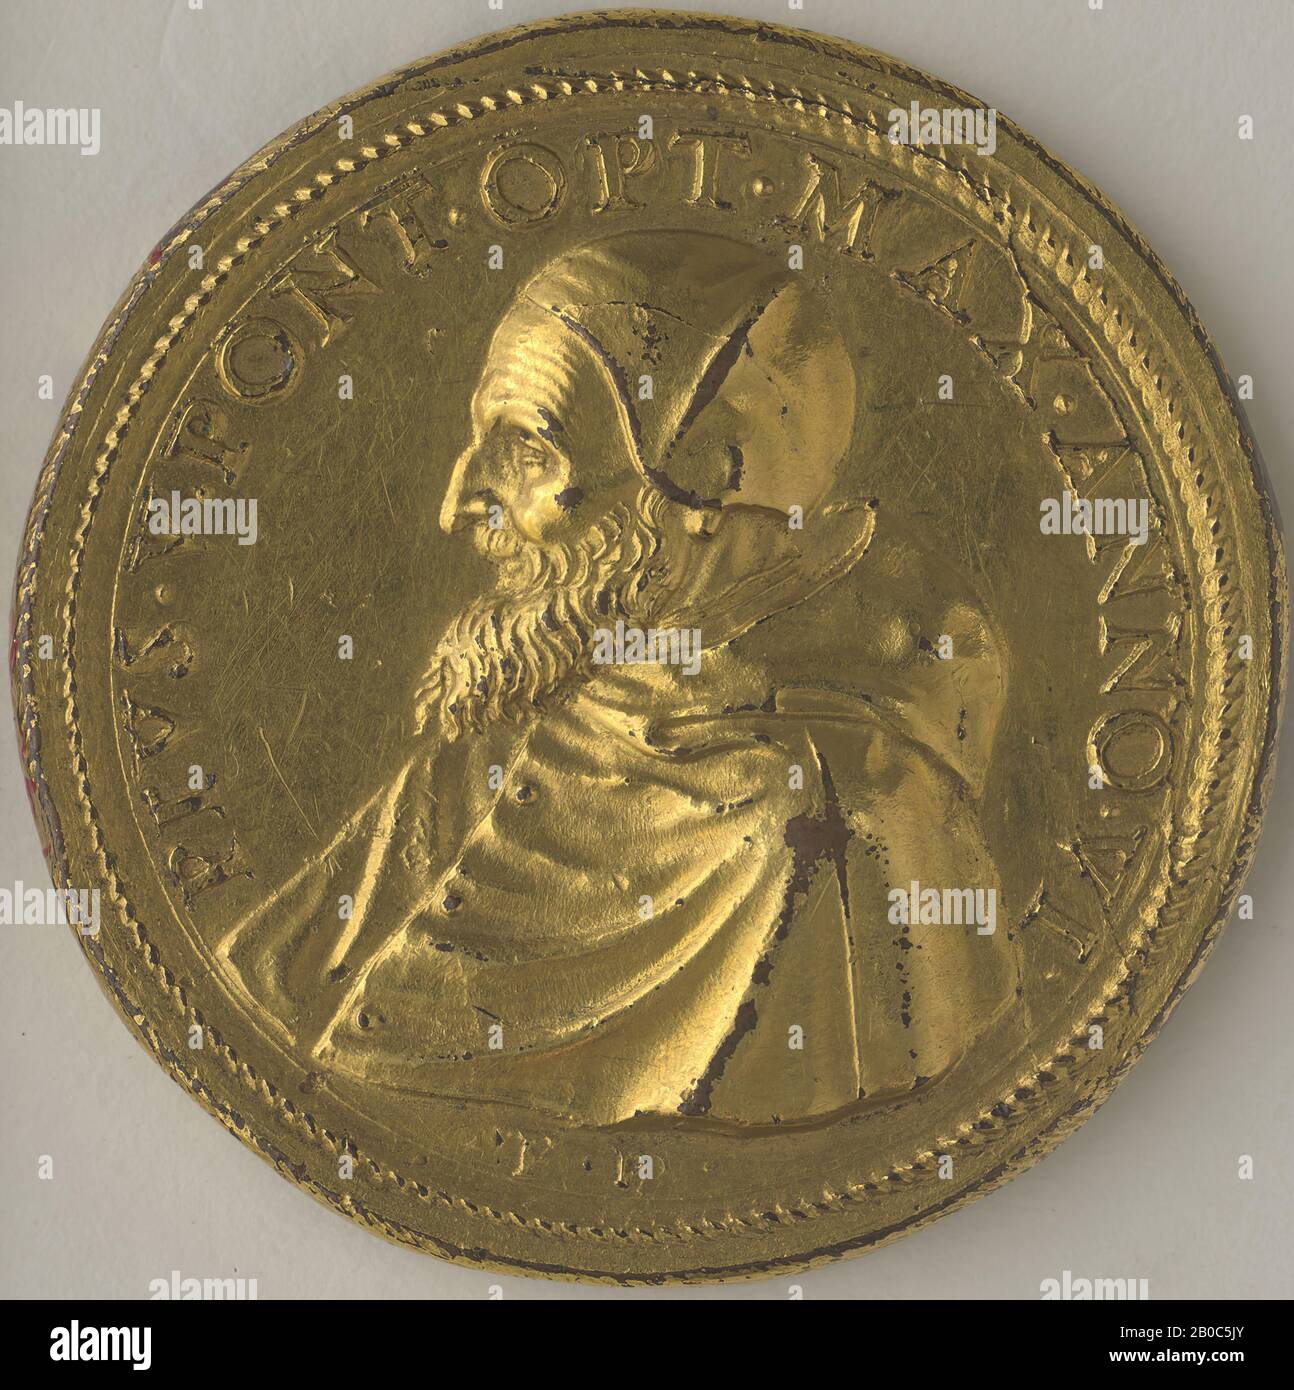 Gian Federigo Bonzagni, Pius V (1504-1572), Pope 1566-1572, The Battle of Lepanto, 1571, gilt, copper, 1 7/16 in. (3.7 cm.), This medal was specially made to celebrate the Holy Alliance's decisive naval victory over the Ottoman Turks at Lepanto on October 7, 1571, which was cause for rejoicing throughout Spain and Italy. The reverse depicts the battle with a figure of God in the heavens striking the enemy. The reverse inscription references the Latin excerpt from Exodus 15:6: Thy right hand, O Lord, hath dashed in pieces the enemy Stock Photo